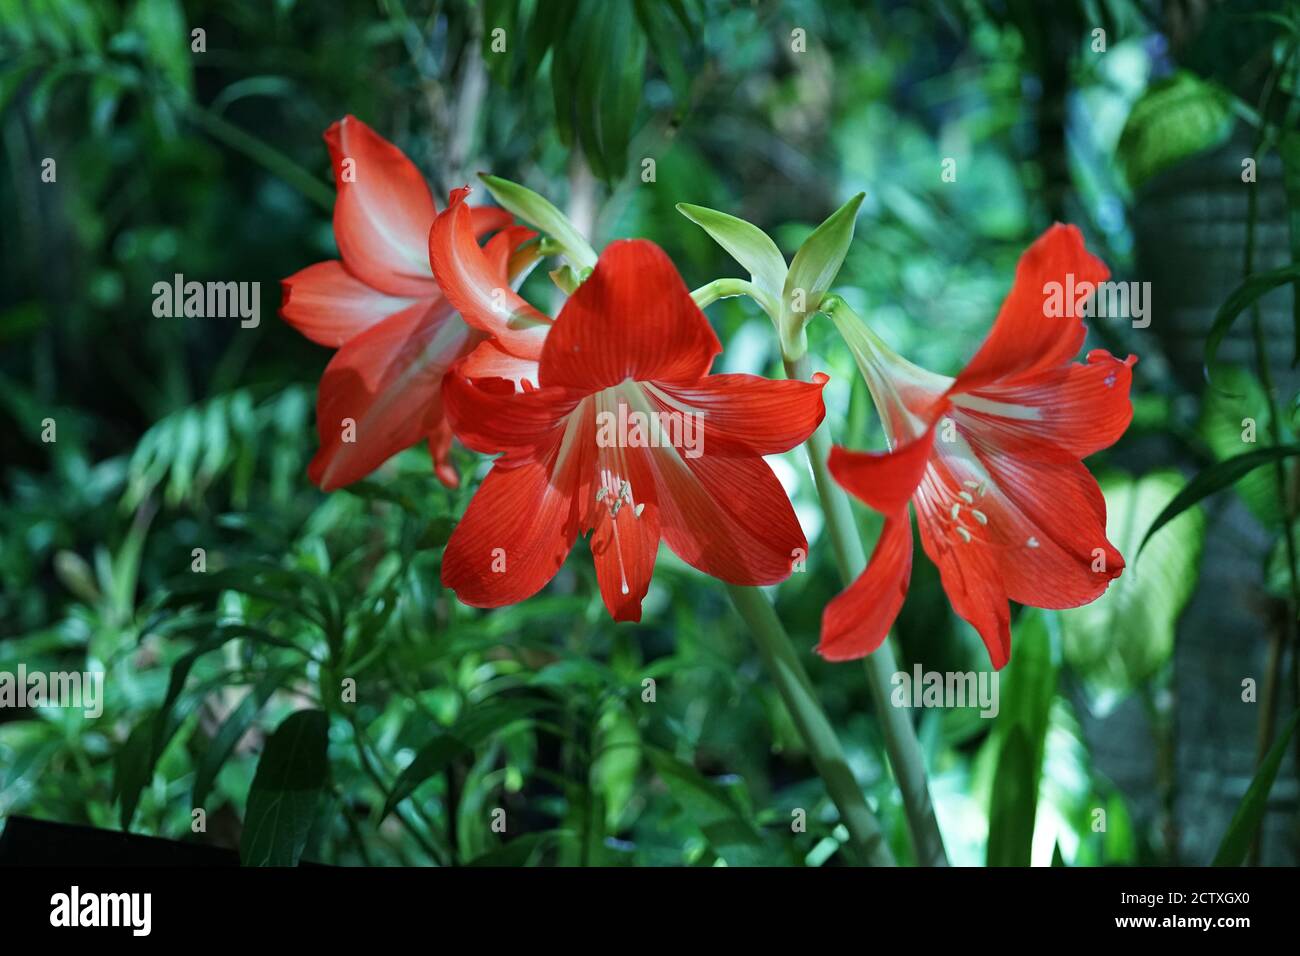 Three bright red amaryllis (amaryllidaceae) flowers on a background of greenery. Indoor flower close up. Stock Photo